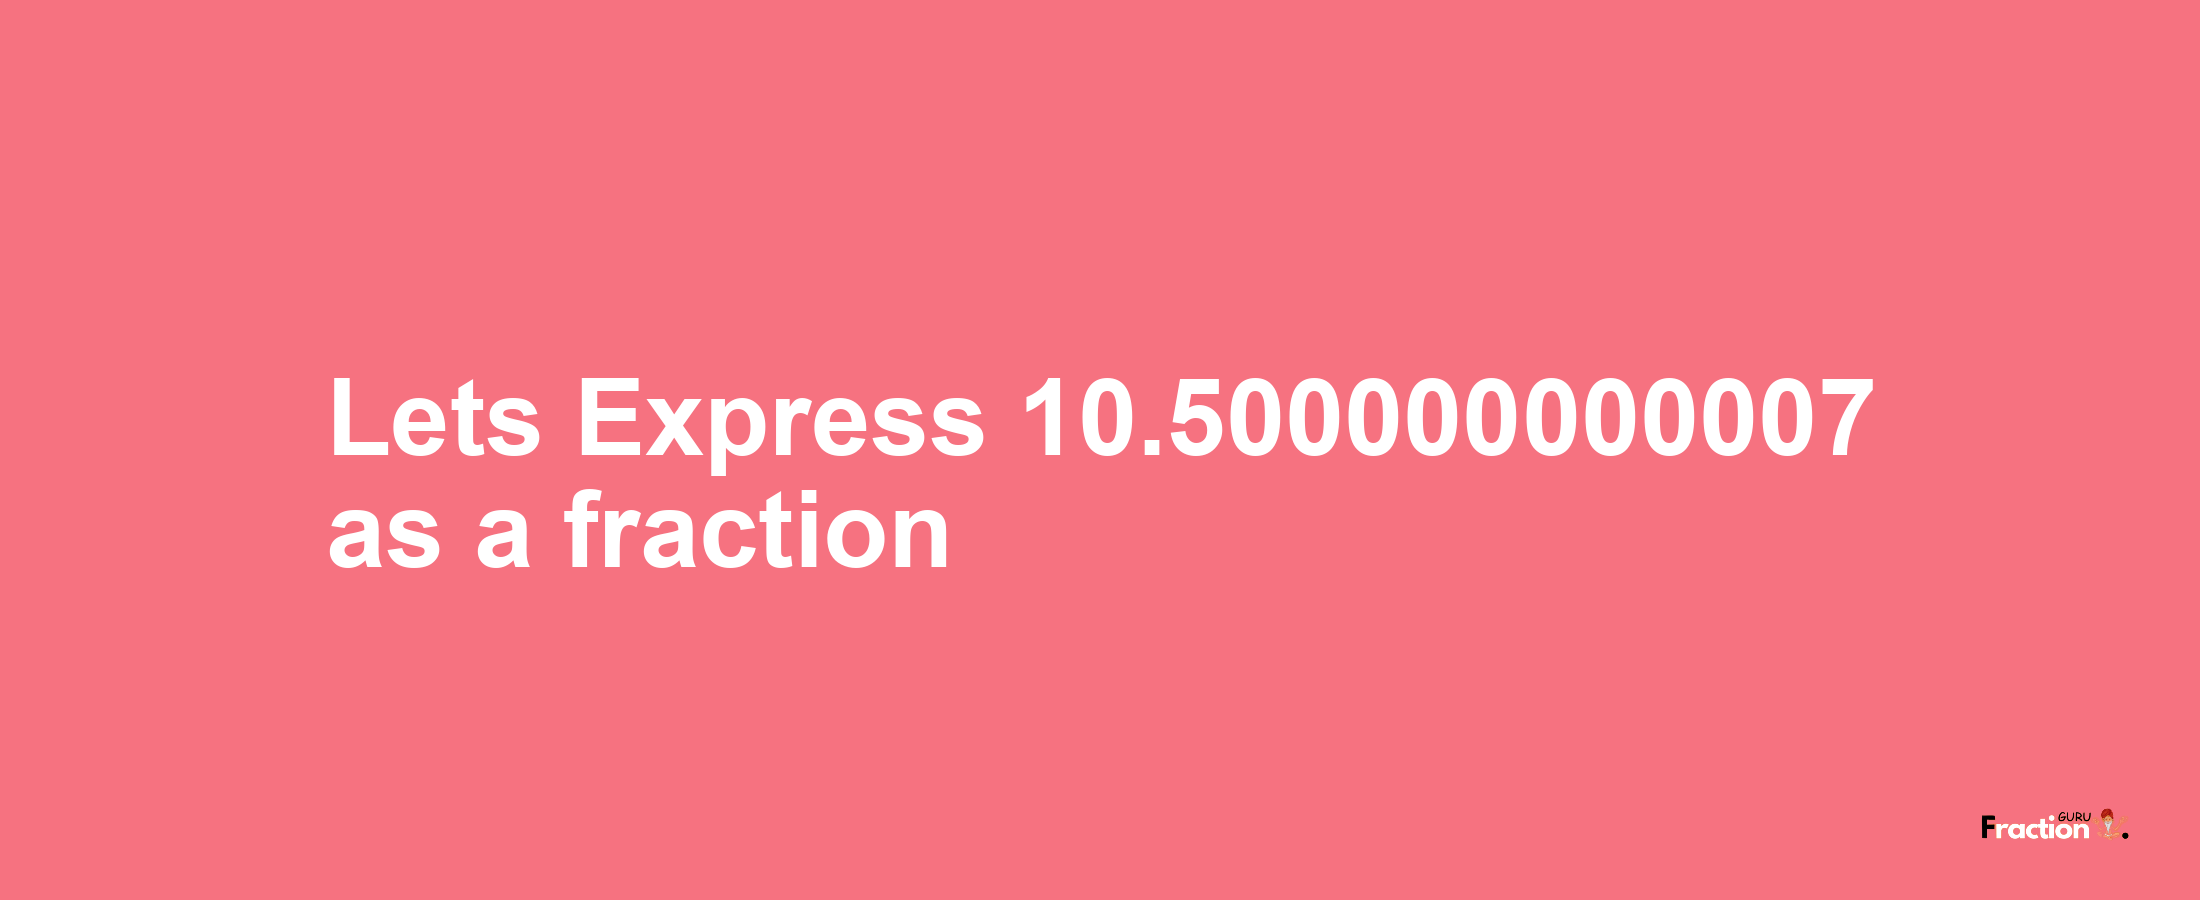 Lets Express 10.500000000007 as afraction